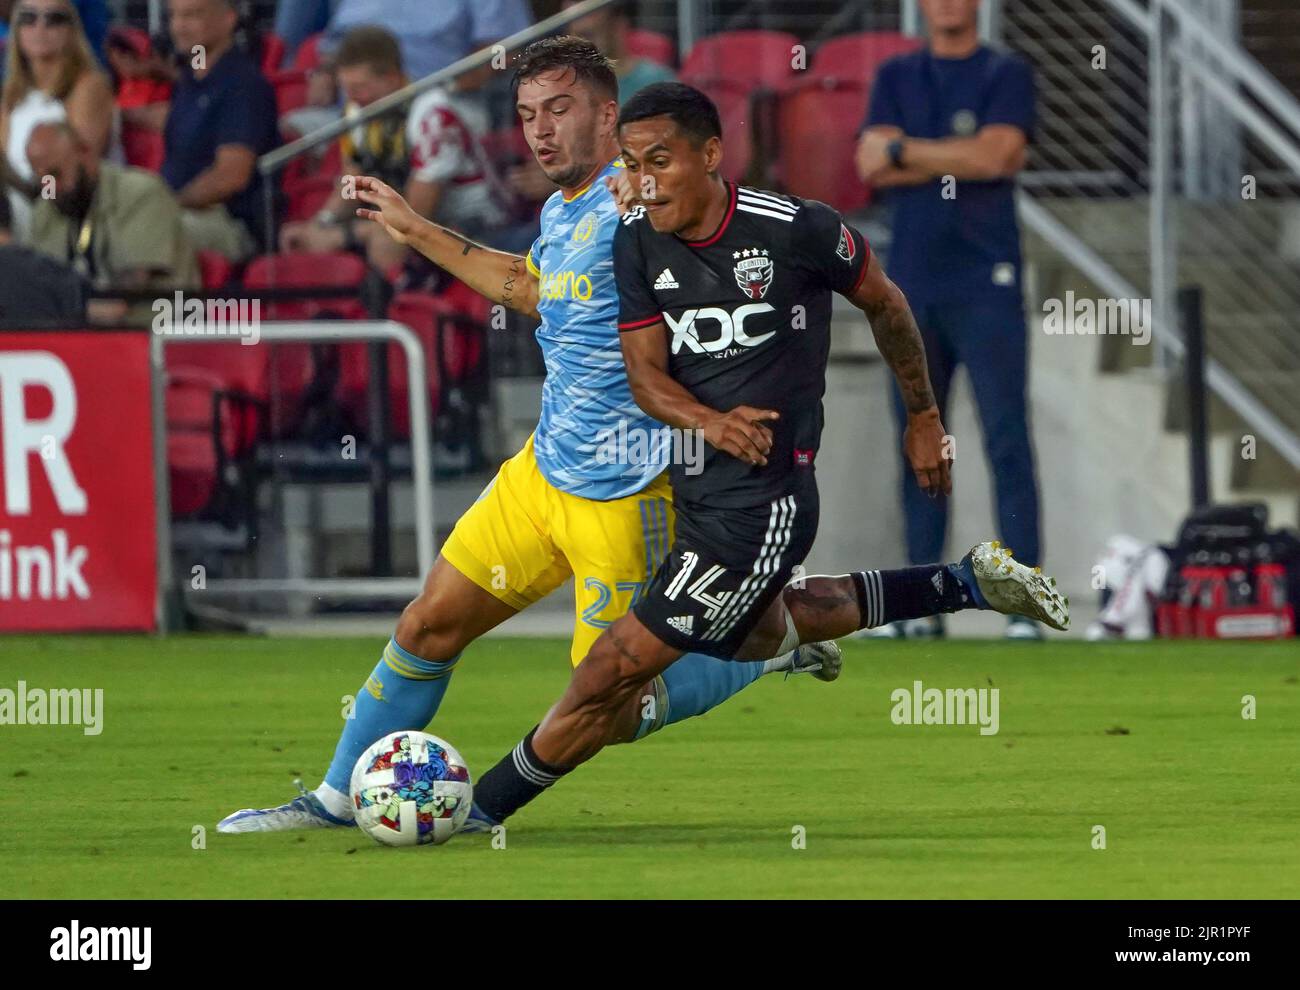 WASHINGTON, DC, USA - 20 AUGUST 2022: D.C. United midfielder Andy Najar (14) cuts away from Philadelphia Union defender Kai Wagner (27) during a MLS match between D.C United and the Philadelphia Union on August 20, 2022, at Audi Field, in Washington, DC. (Photo by Tony Quinn-Alamy Live News) Stock Photo